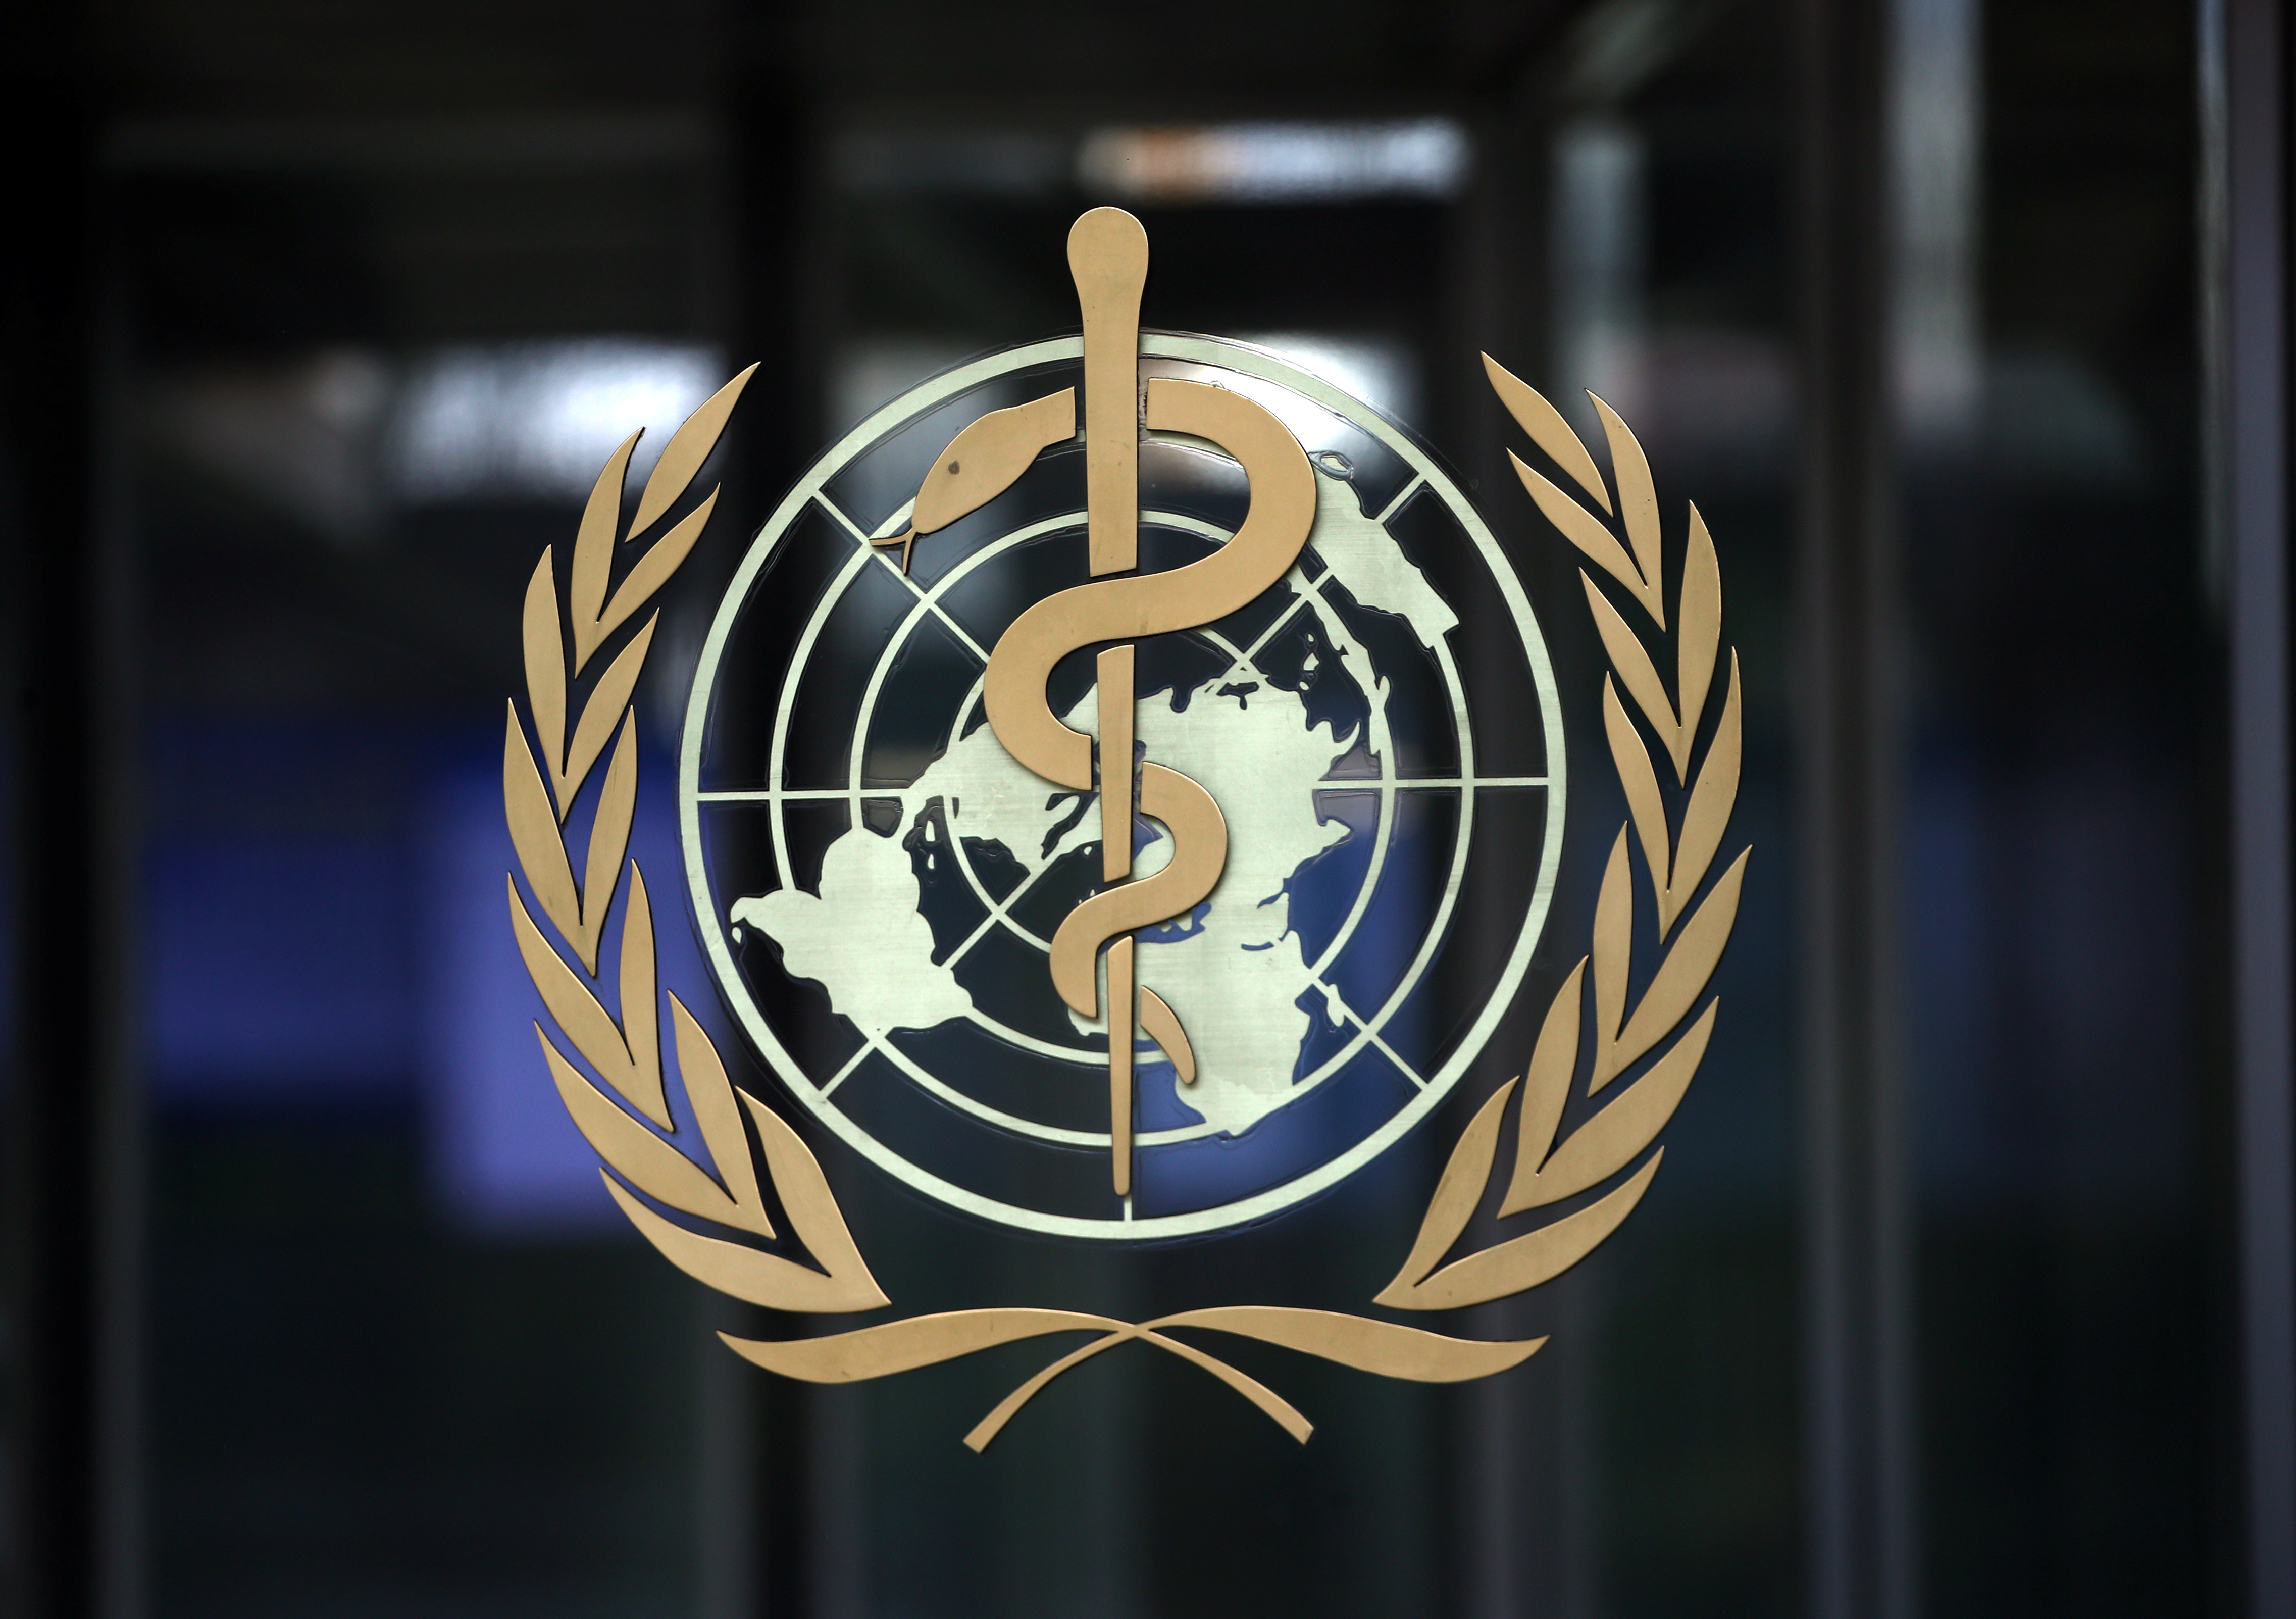 A logo is pictured on the headquarters of the World Health Orgnaization (WHO) ahead of a meeting of the Emergency Committee on the novel coronavirus (2019-nCoV) in Geneva, Switzerland, January 30, 2020. REUTERS/Denis Balibouse